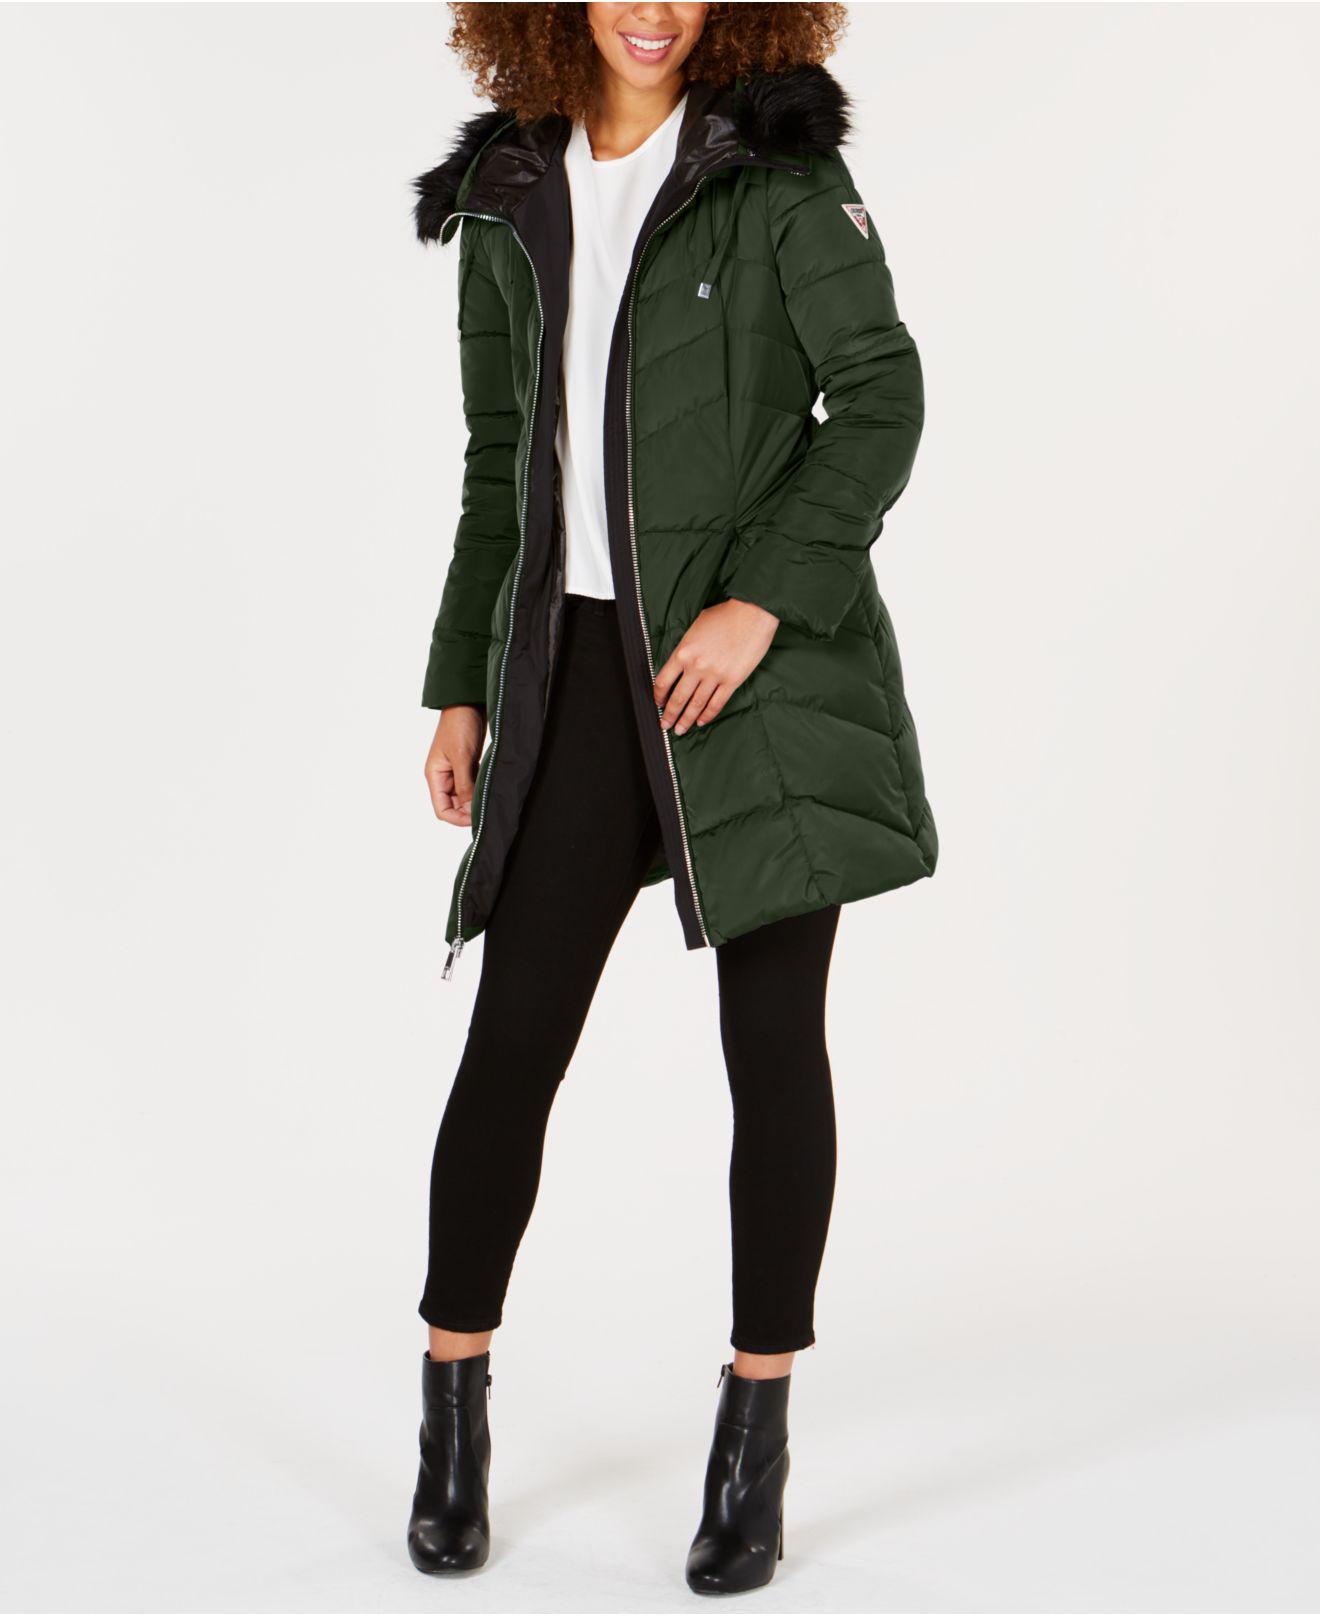 Guess Faux-fur-trim Hooded Belted Puffer Coat in Olive (Green) - Lyst